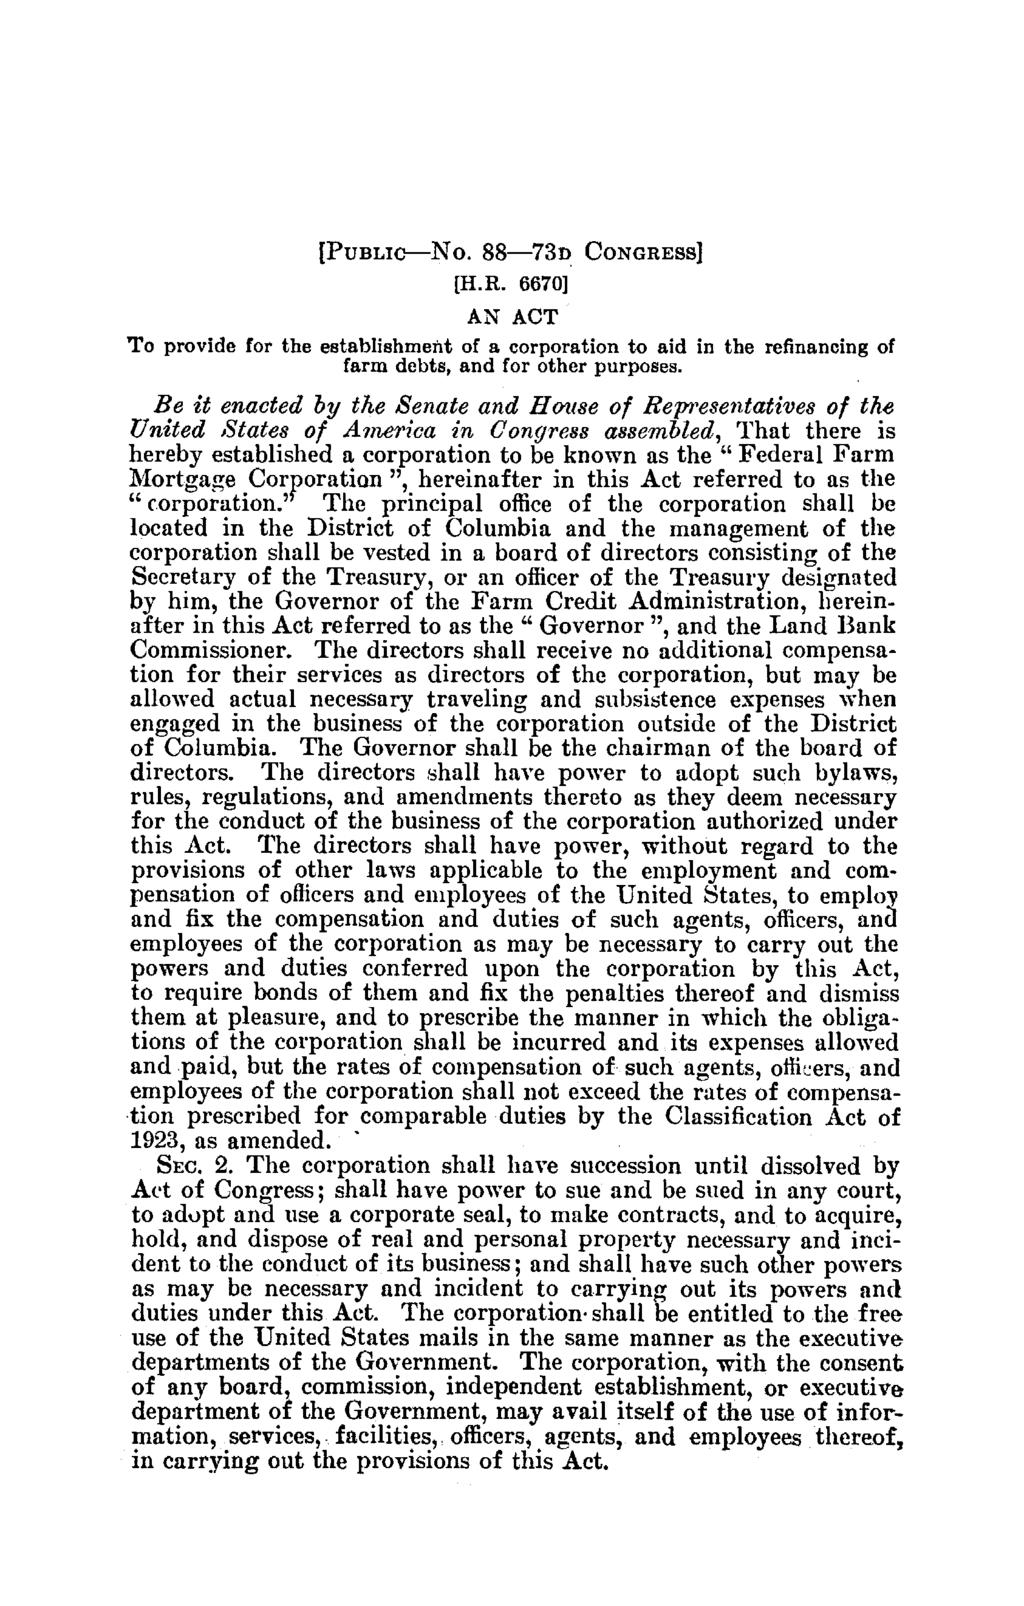 [P ublic No. 88 73d C on gress] [H.R. 6670] AN ACT T o provide for the establishment of a corporation to aid in the refinancing of farm debts, and for other purposes.